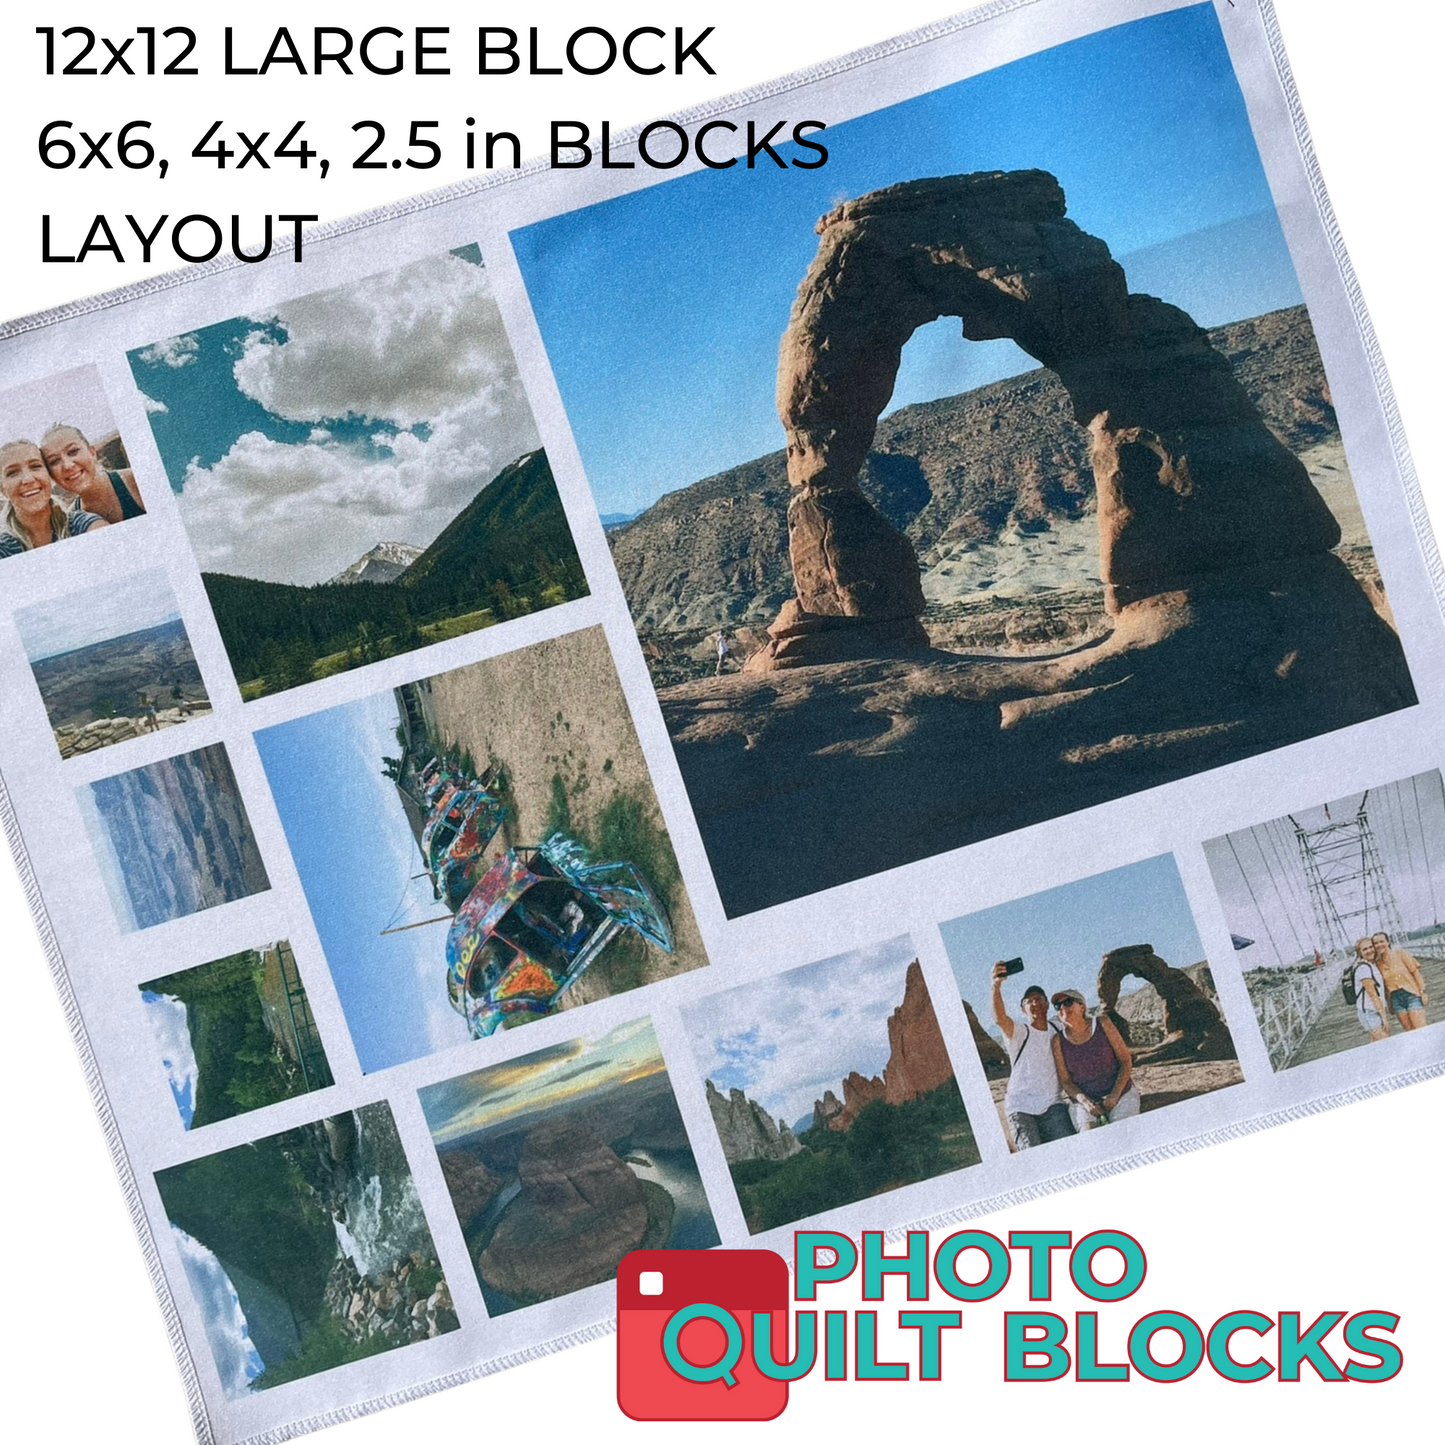 12 x 12 Fat Quarter Fabric Layouts | Quilts and Quilts